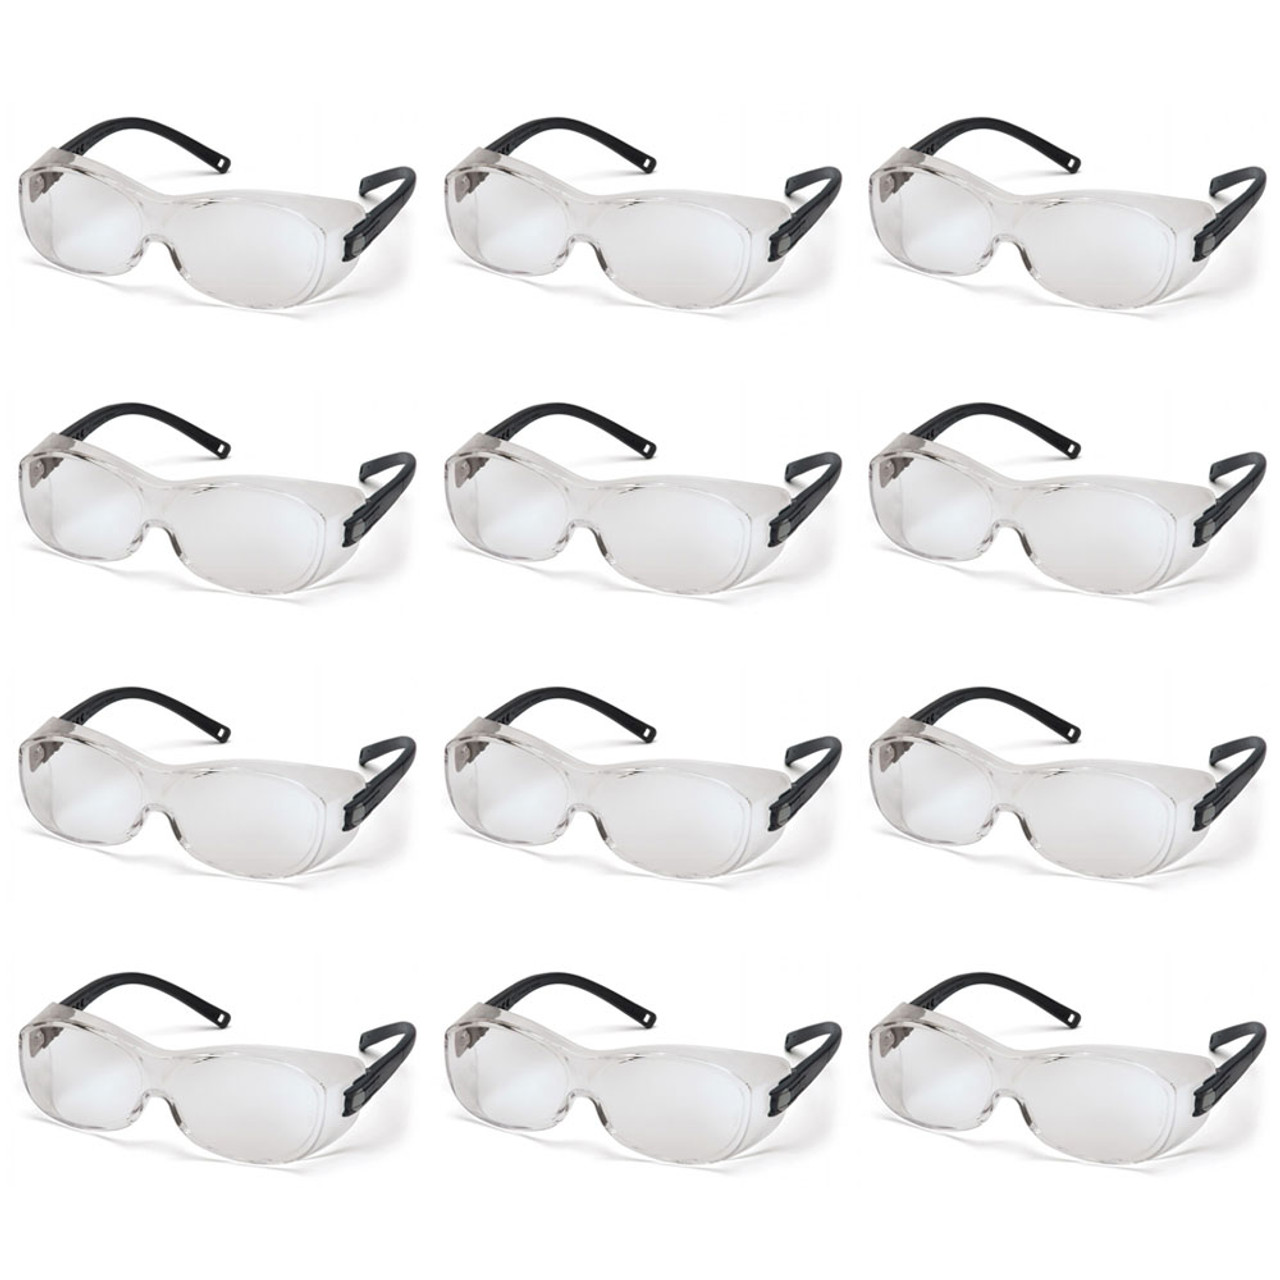 Pyramex, OTS Series, Safety Glasses with H2X Anti-Fog Lens, 12 Pack